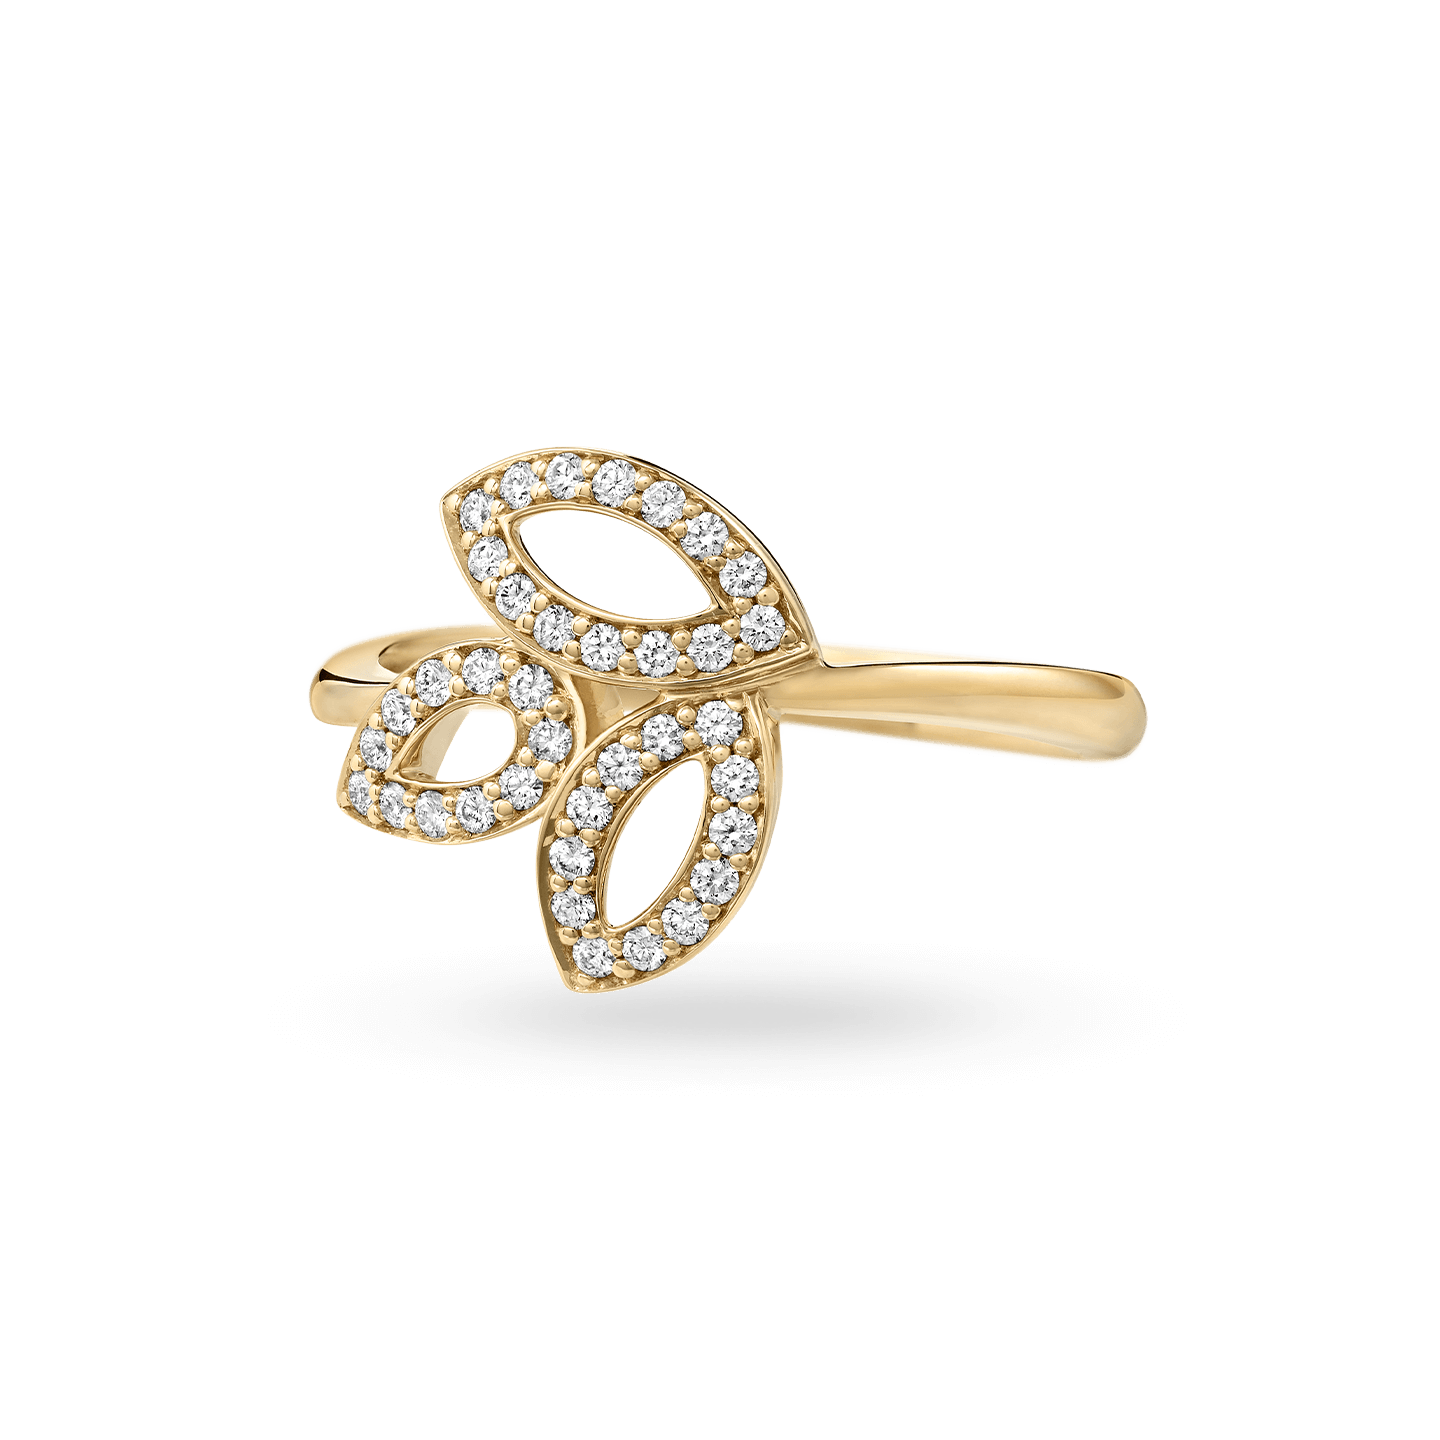 Lily Cluster Diamond Ring in Yellow Gold, Product Image 2